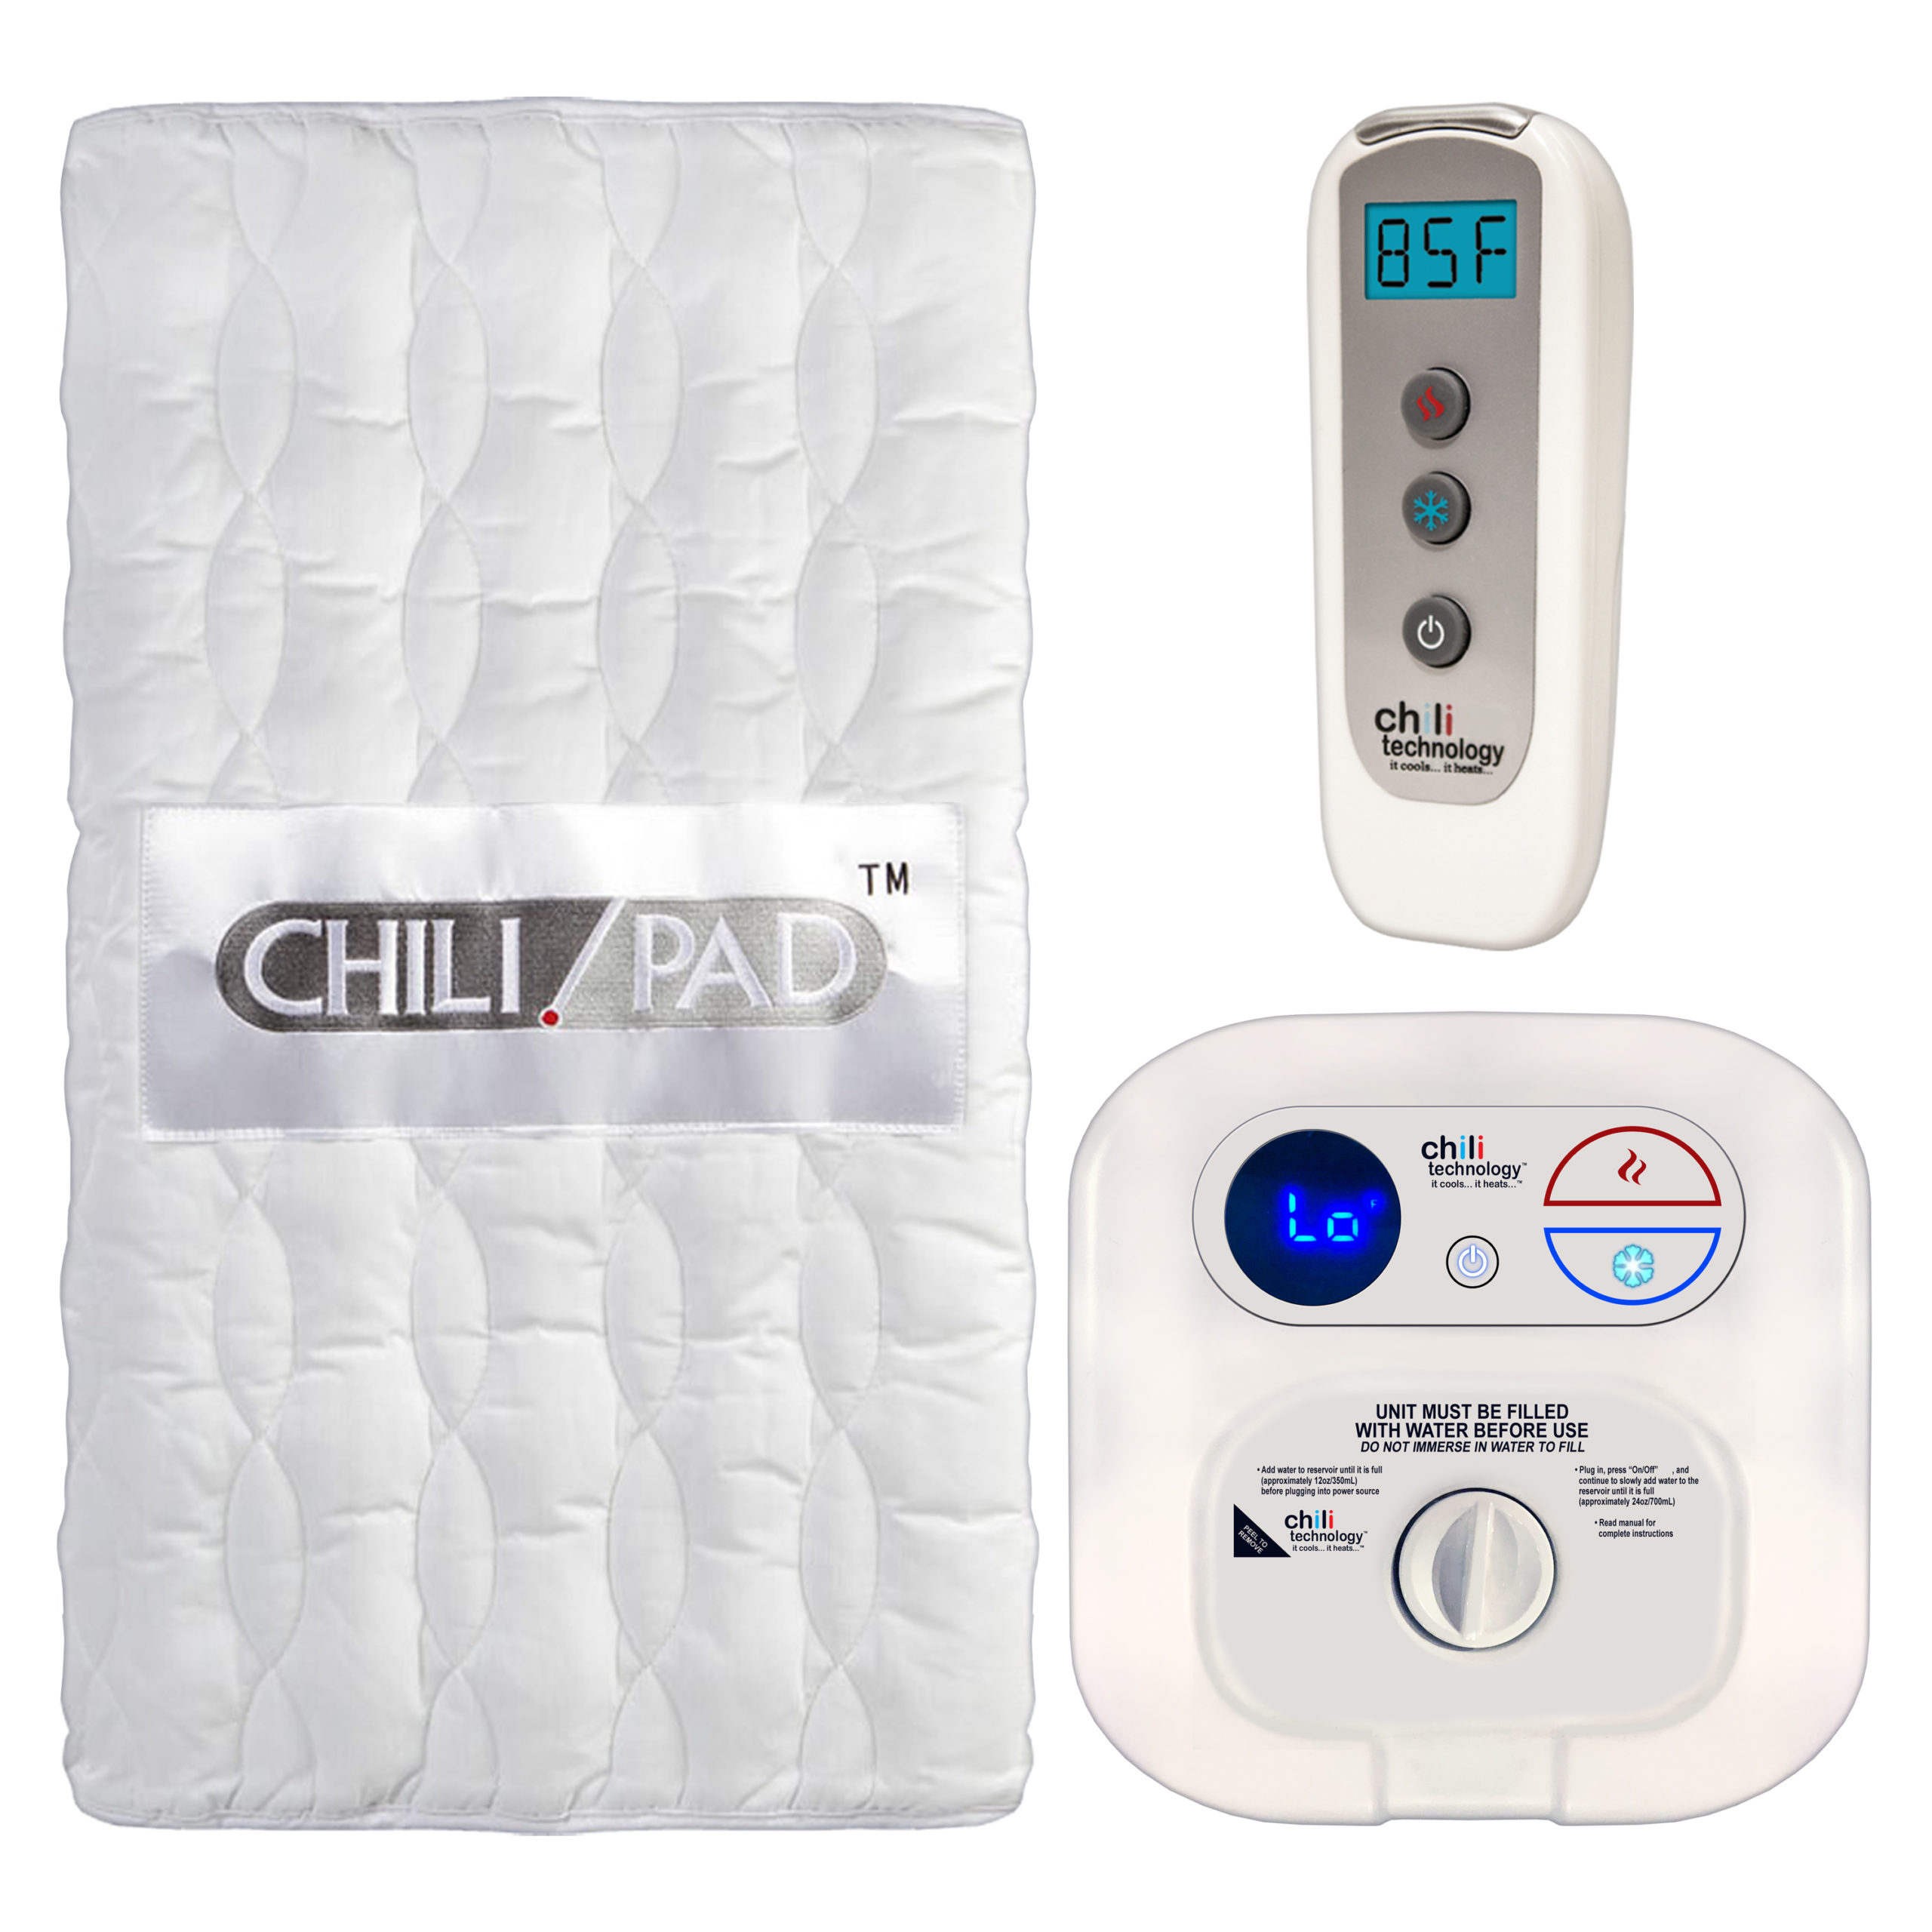 Always Cool Sheets - Chilipad|Temperature|Mattress|Cube|Sleep|Bed|Water|System|Pad|Ooler|Control|Unit|Night|Bedjet|Technology|Side|Air|Product|Review|Body|Time|Degrees|Noise|Price|Pod|Tubes|Heat|Device|Cooling|Room|King|App|Features|Size|Cover|Sleepers|Sheets|Energy|Warranty|Quality|Mattress Pad|Control Unit|Cube Sleep System|Sleep Pod|Distilled Water|Remote Control|Sleep System|Desired Temperature|Water Tank|Chilipad Cube|Chili Technology|Deep Sleep|Pro Cover|Ooler Sleep System|Hydrogen Peroxide|Cool Mesh|Sleep Temperature|Fitted Sheet|Pod Pro|Sleep Quality|Smartphone App|Sleep Systems|Chilipad Sleep System|New Mattress|Sleep Trial|Full Refund|Mattress Topper|Body Heat|Air Flow|Chilipad Review